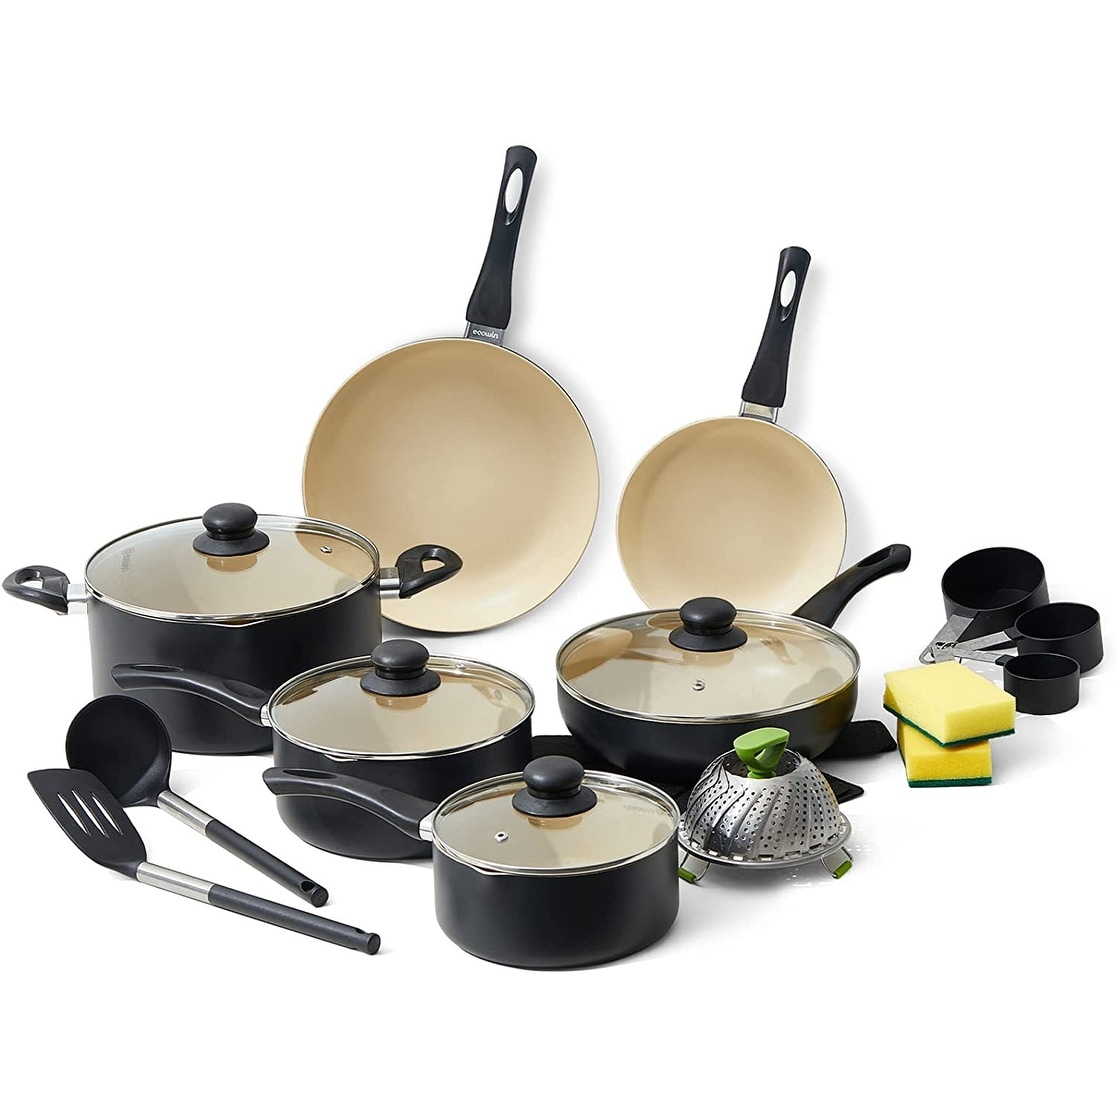 https://ak1.ostkcdn.com/images/products/is/images/direct/c86fa418e07e109e68101ce1cf52f4779ffd4463/Ecowin-Non-Stick-Cooking-Sets%2C-Granite-Coating-Nonstick-Cookware-Set.jpg